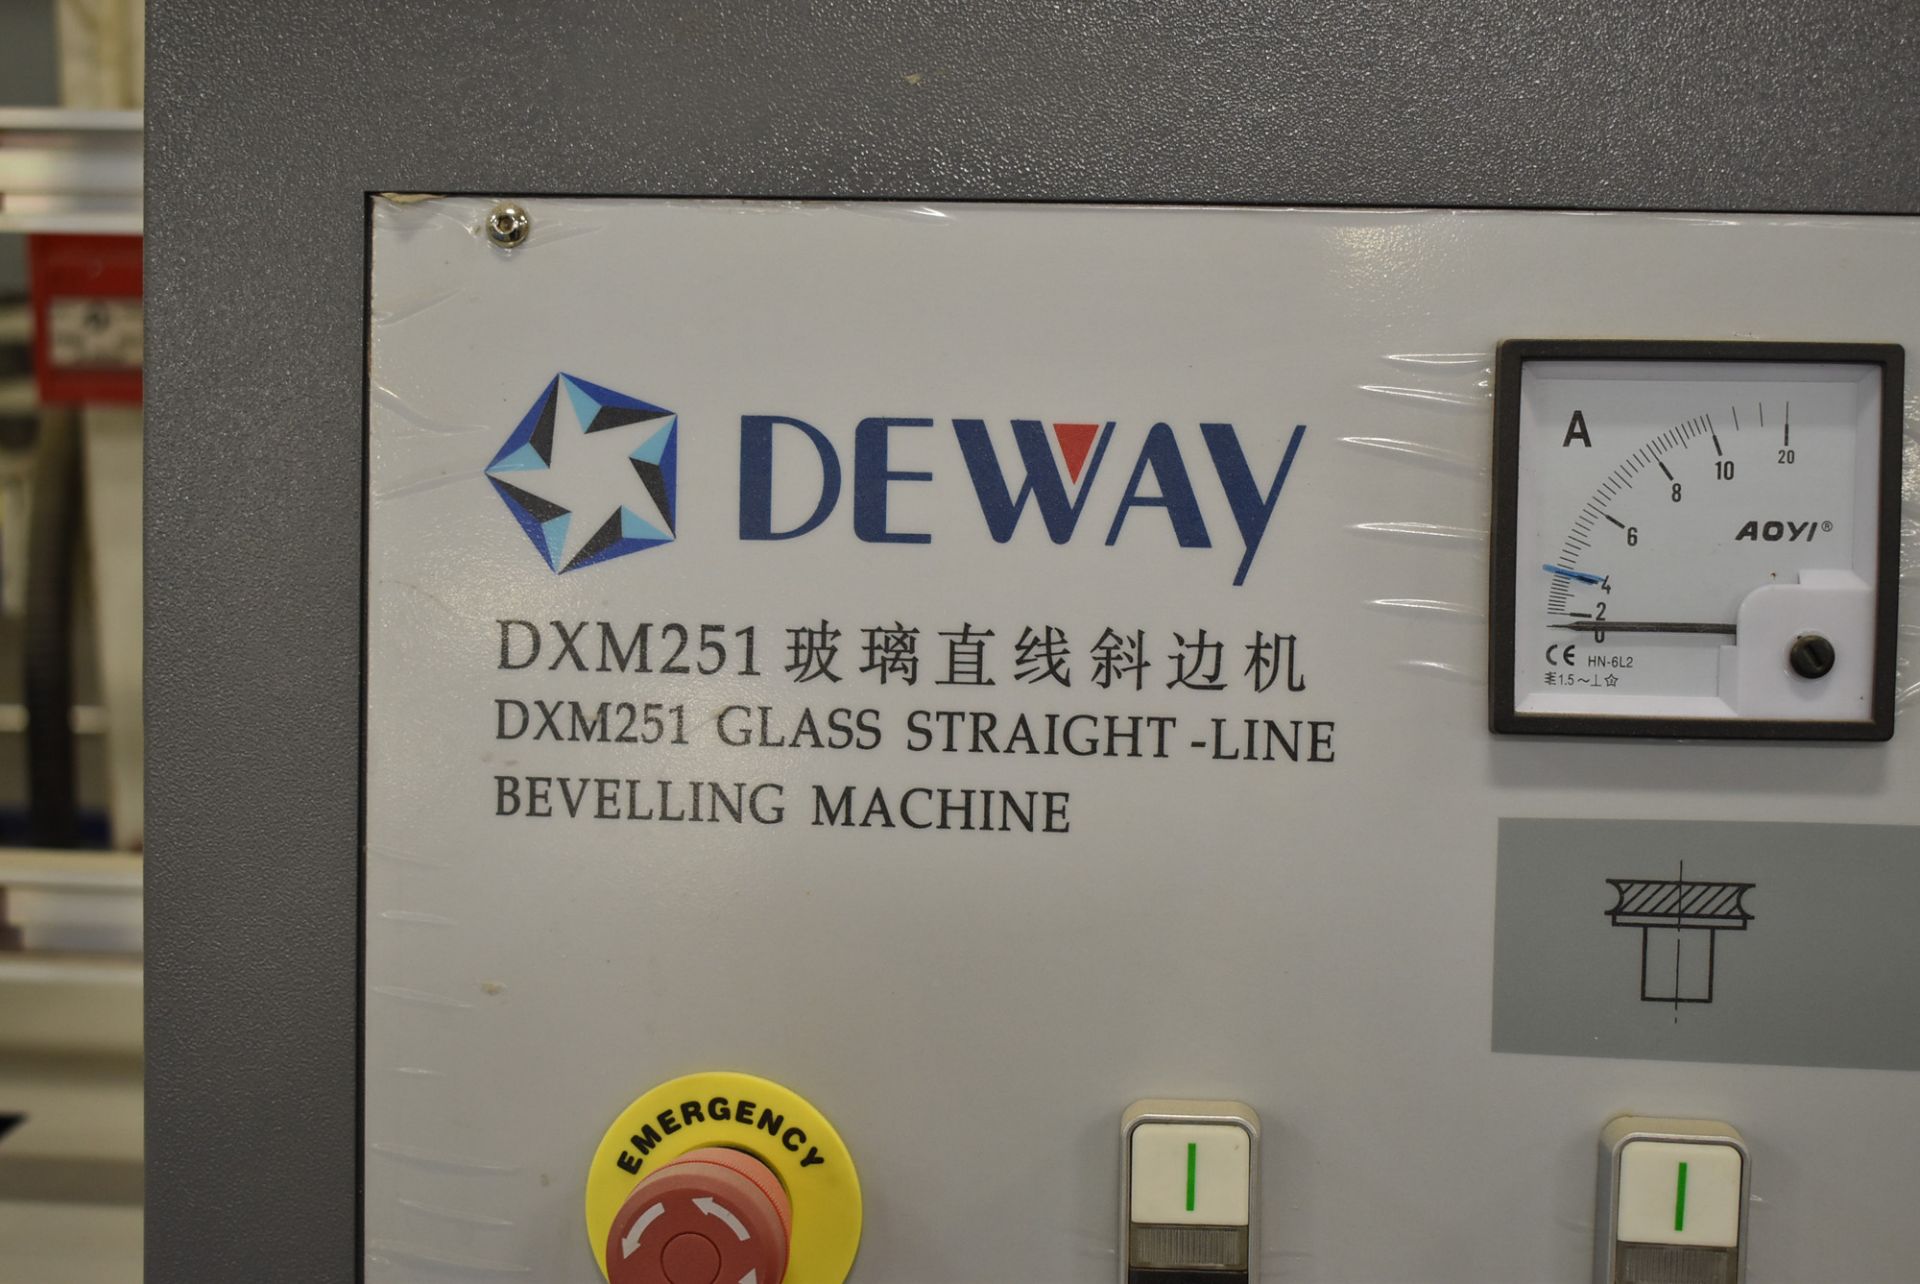 DEWAY (2017) DXM251 GLASS STRAIGHT-LINE BEVELING MACHINE WITH 8 HEADS, POWER FEED, 120MMX120MM GLASS - Image 7 of 8